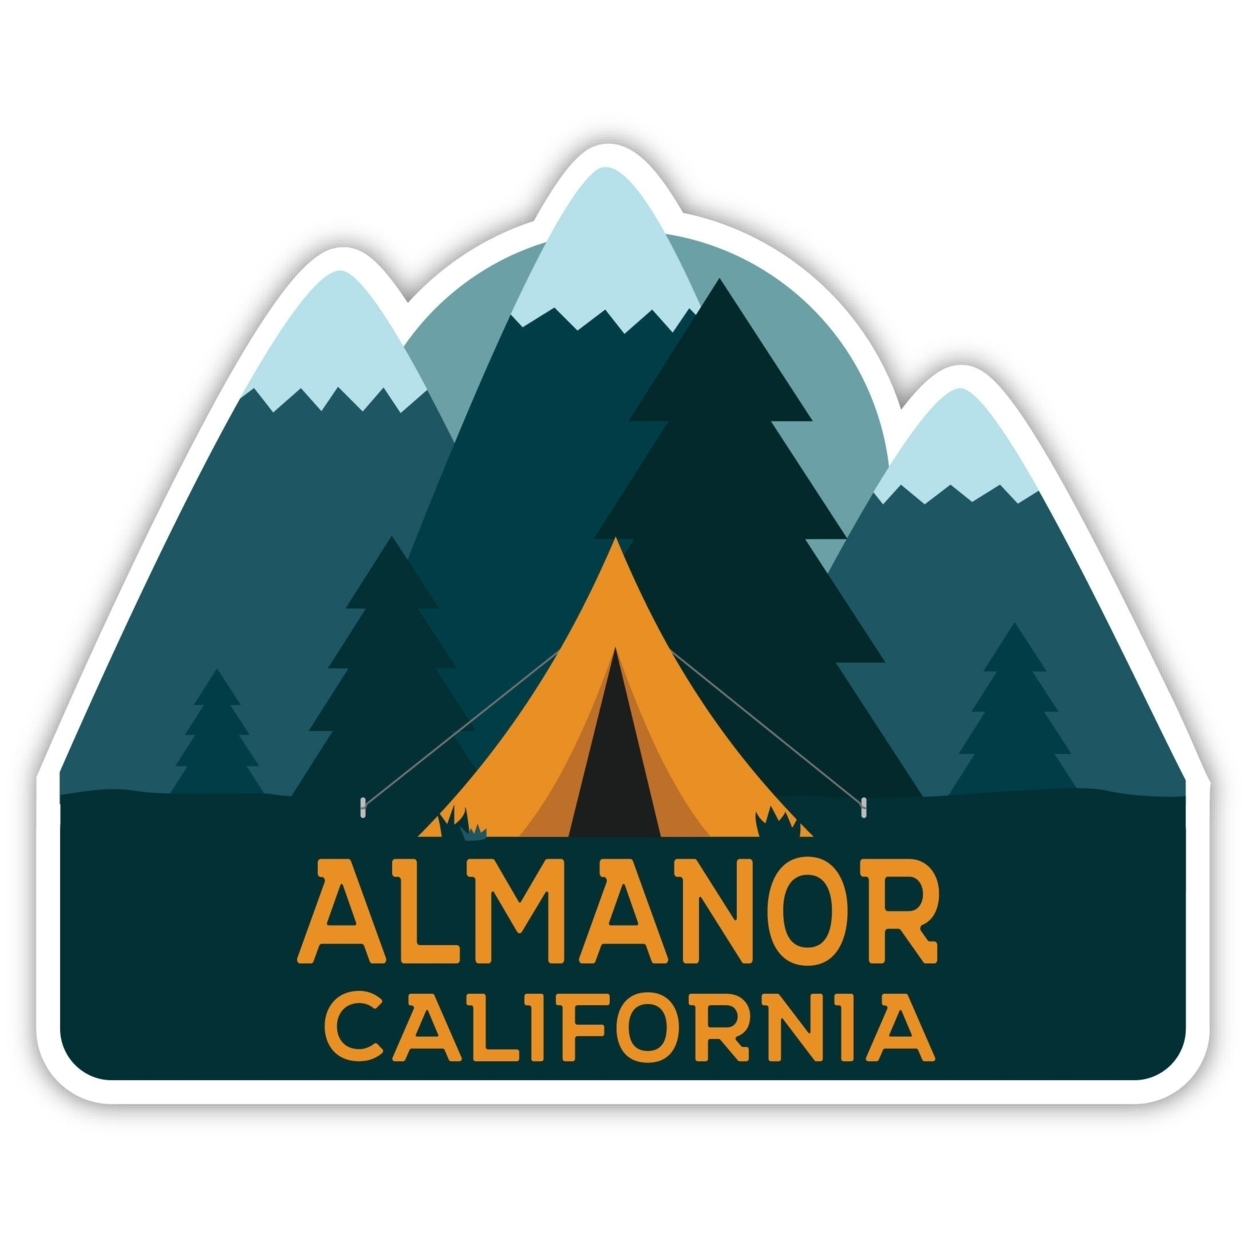 Almanor California Souvenir Decorative Stickers (Choose Theme And Size) - 4-Pack, 8-Inch, Tent